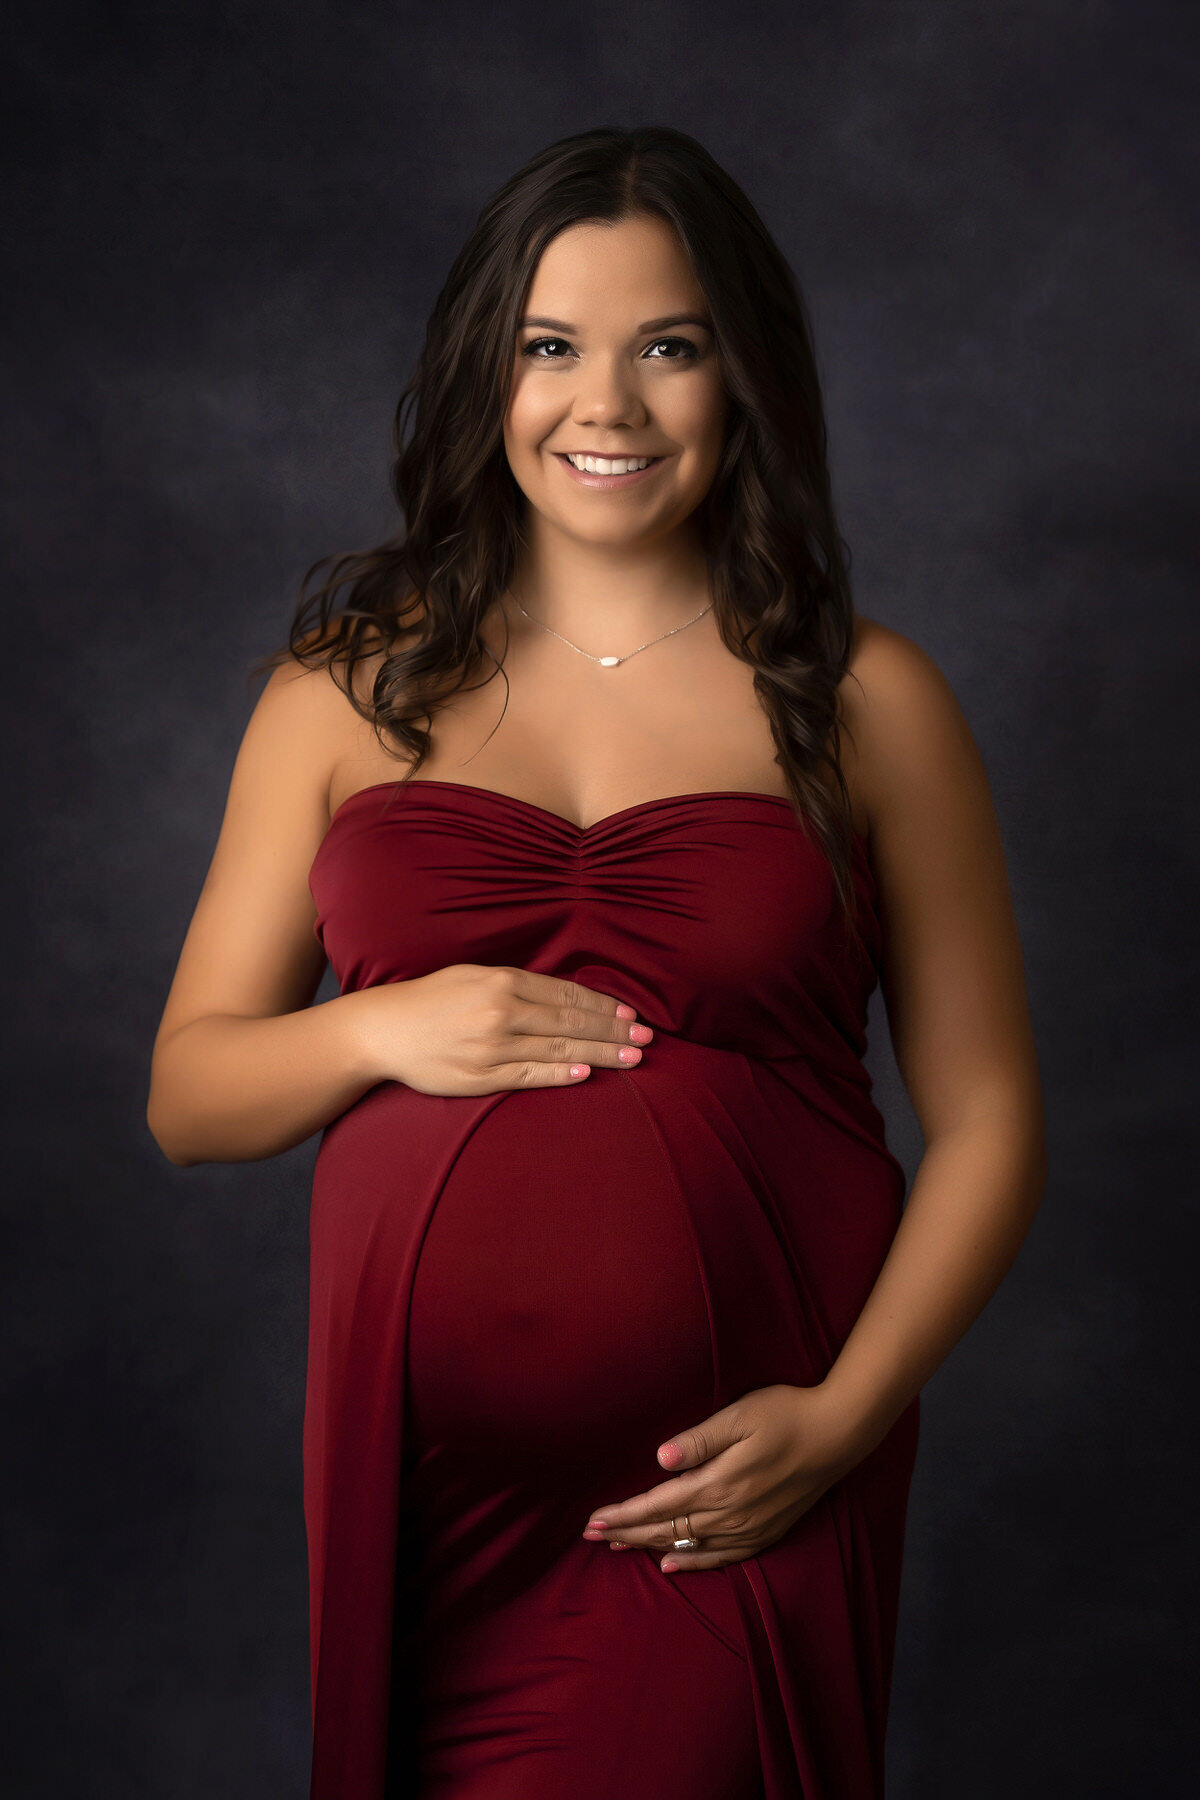 15 Experienced maternity photographer in Charlotte
